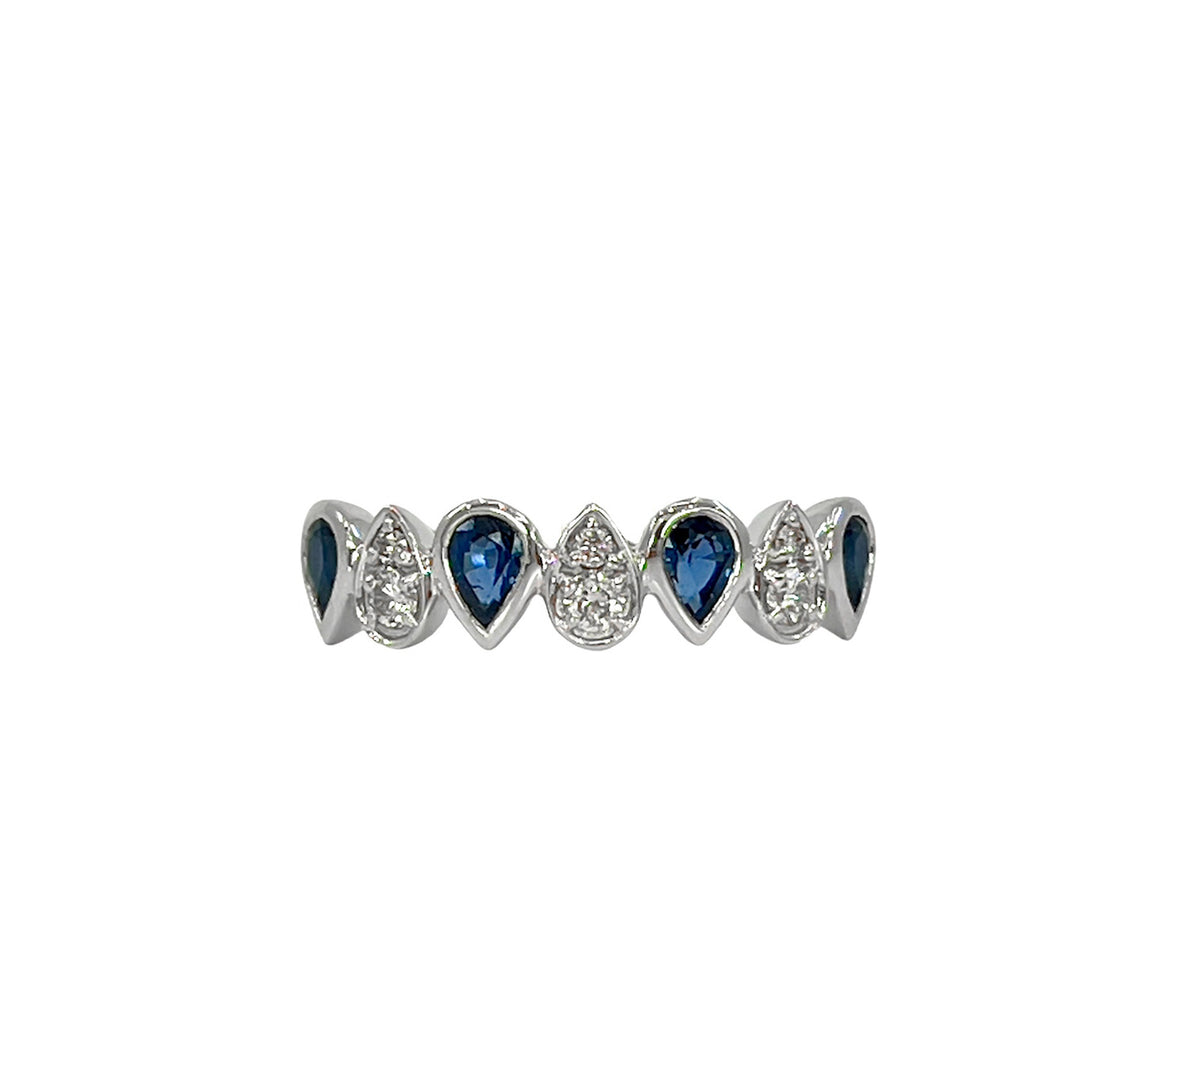 10K White Gold 0.70cttw Sapphire and 0.14cttw Diamond Pear Cut Ring - Size 7